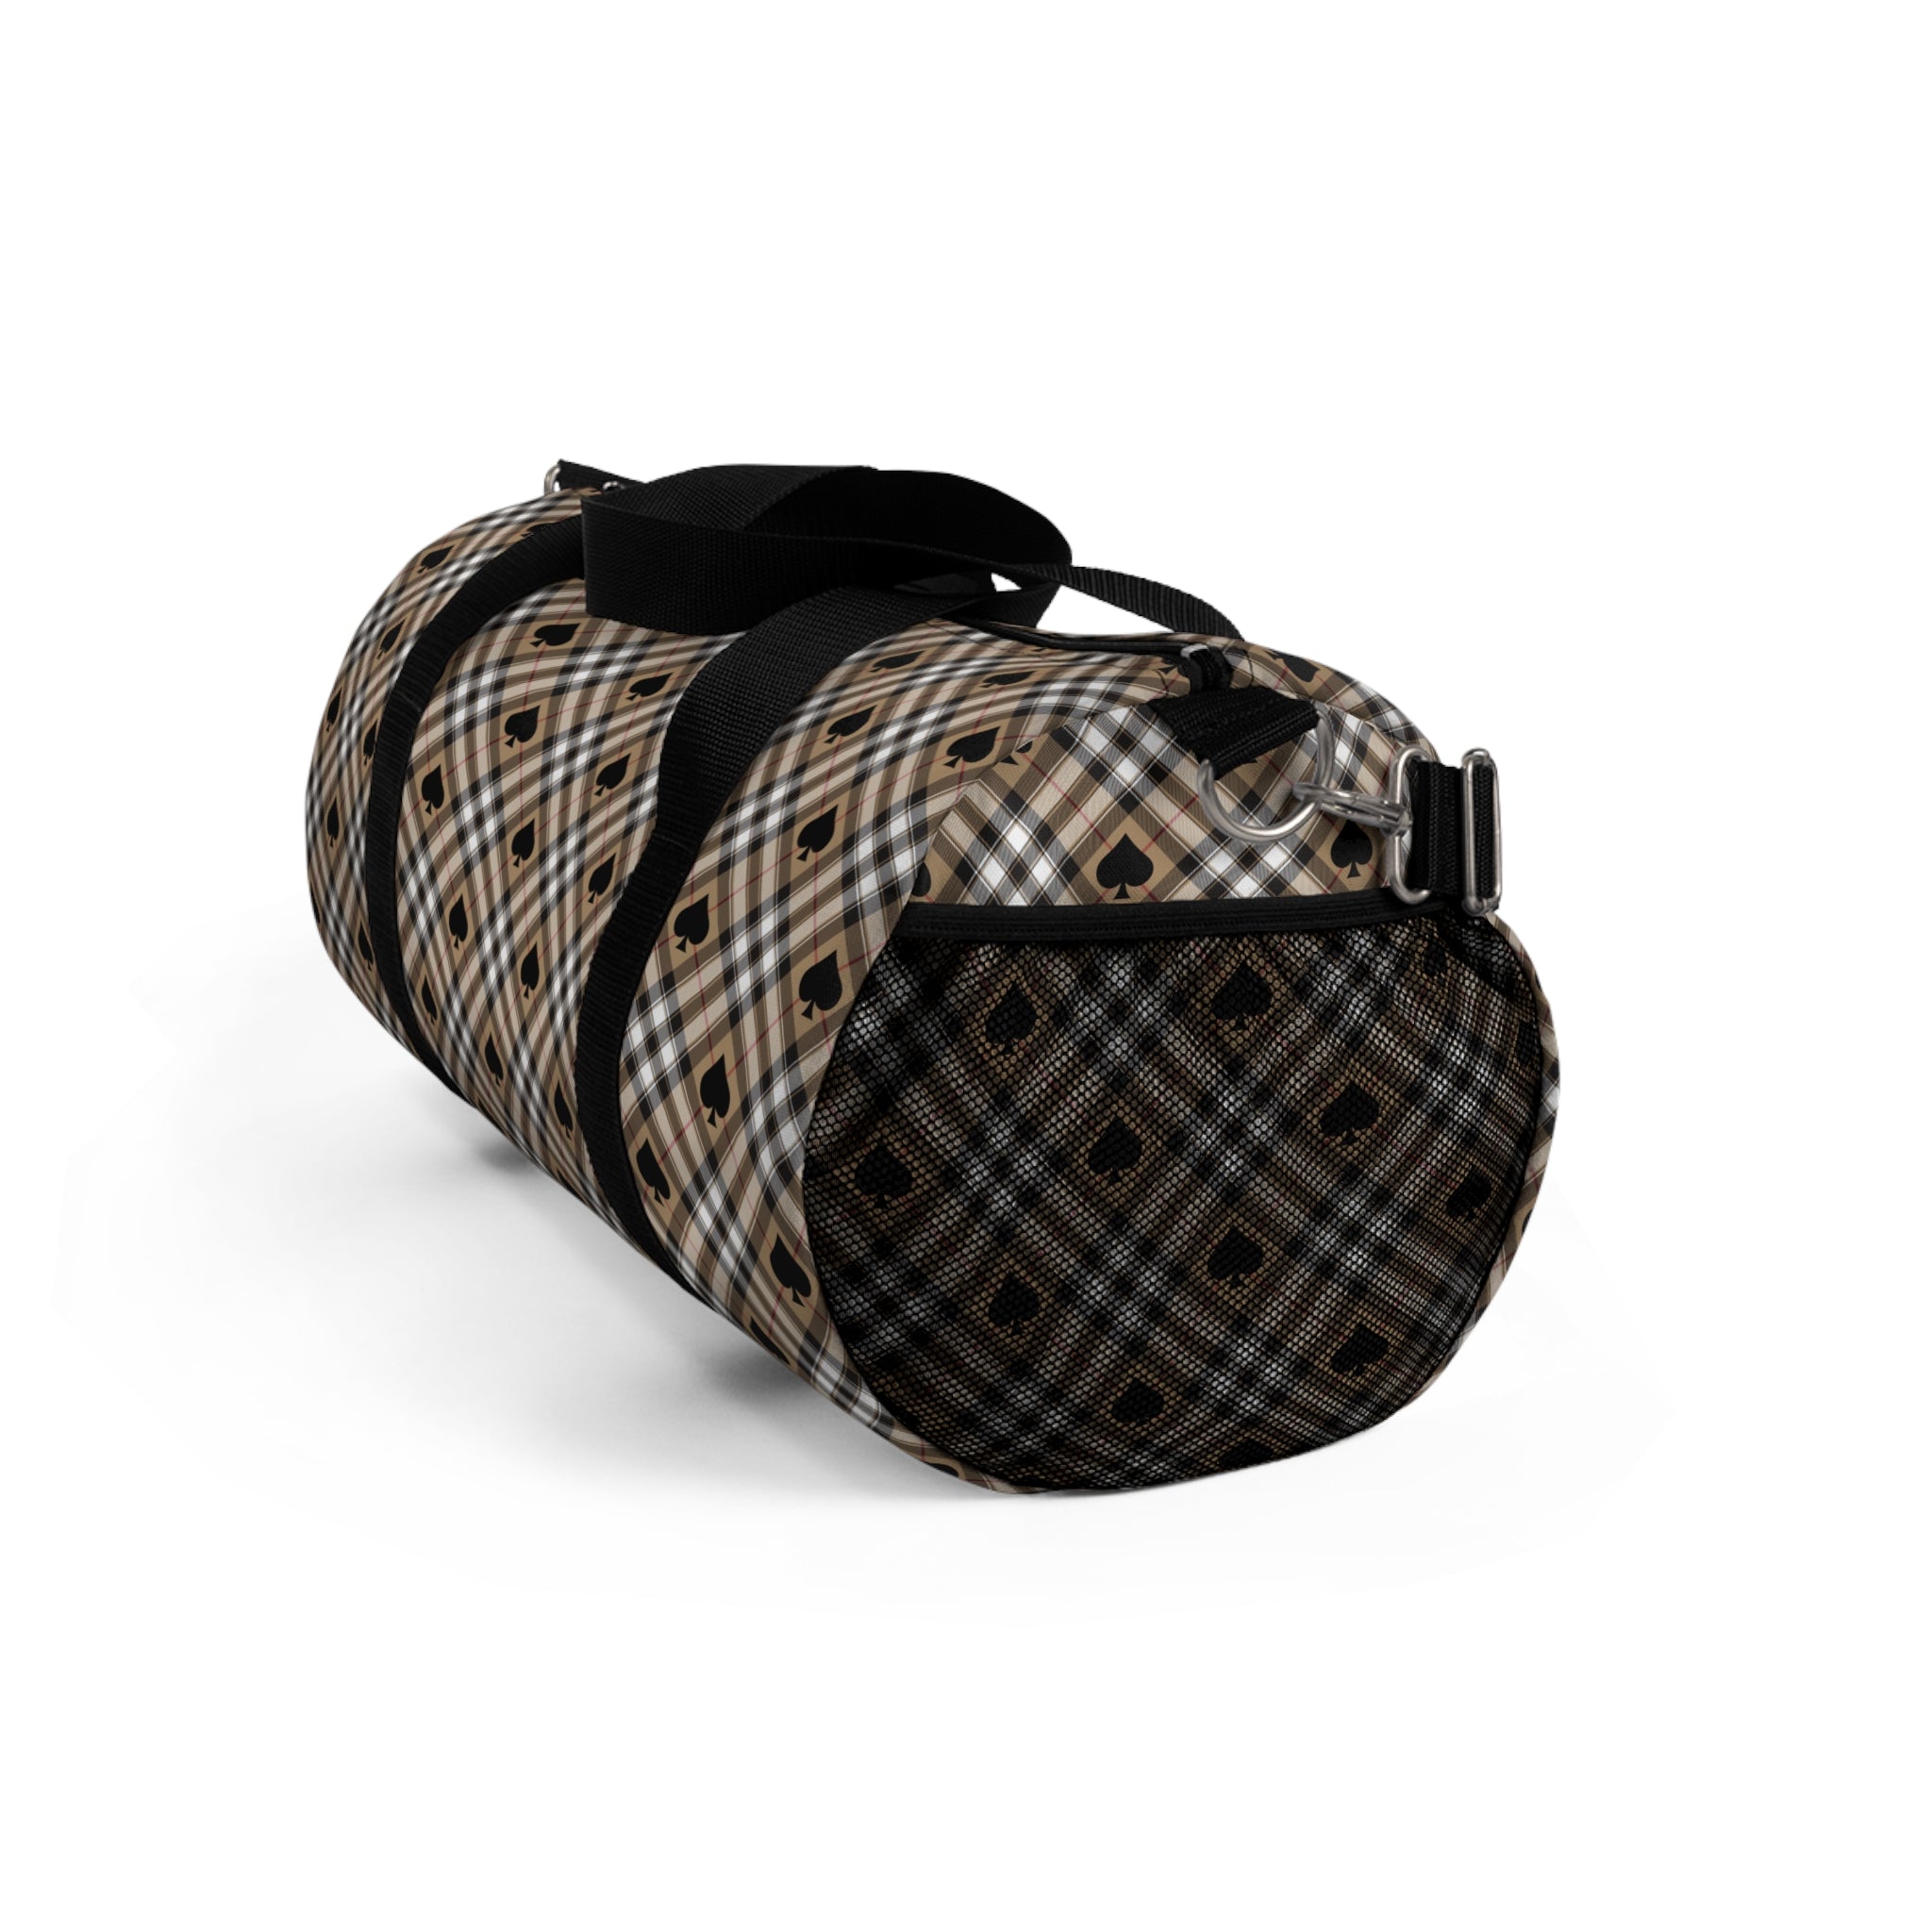  Abby Beige Ace of Spades (Small Pattern) Duffel Bag, Travel and Overnight Bag Bags